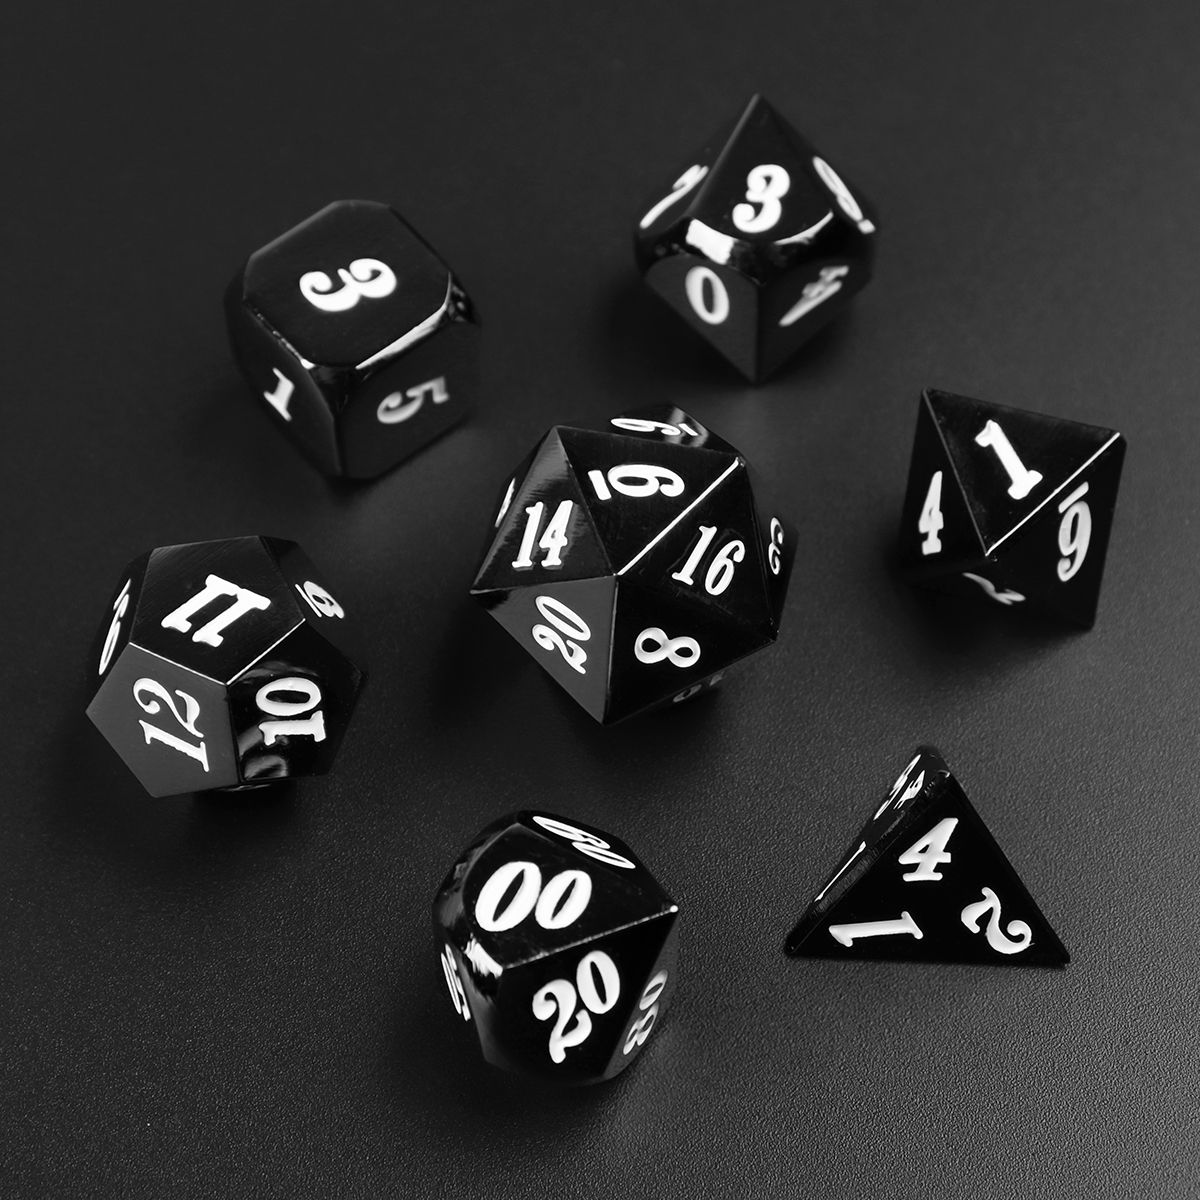 7Pcs-Zinc-Alloy-Polyhedral-Dices-Multi-sided-Dices-Set-With-Bag-1270653